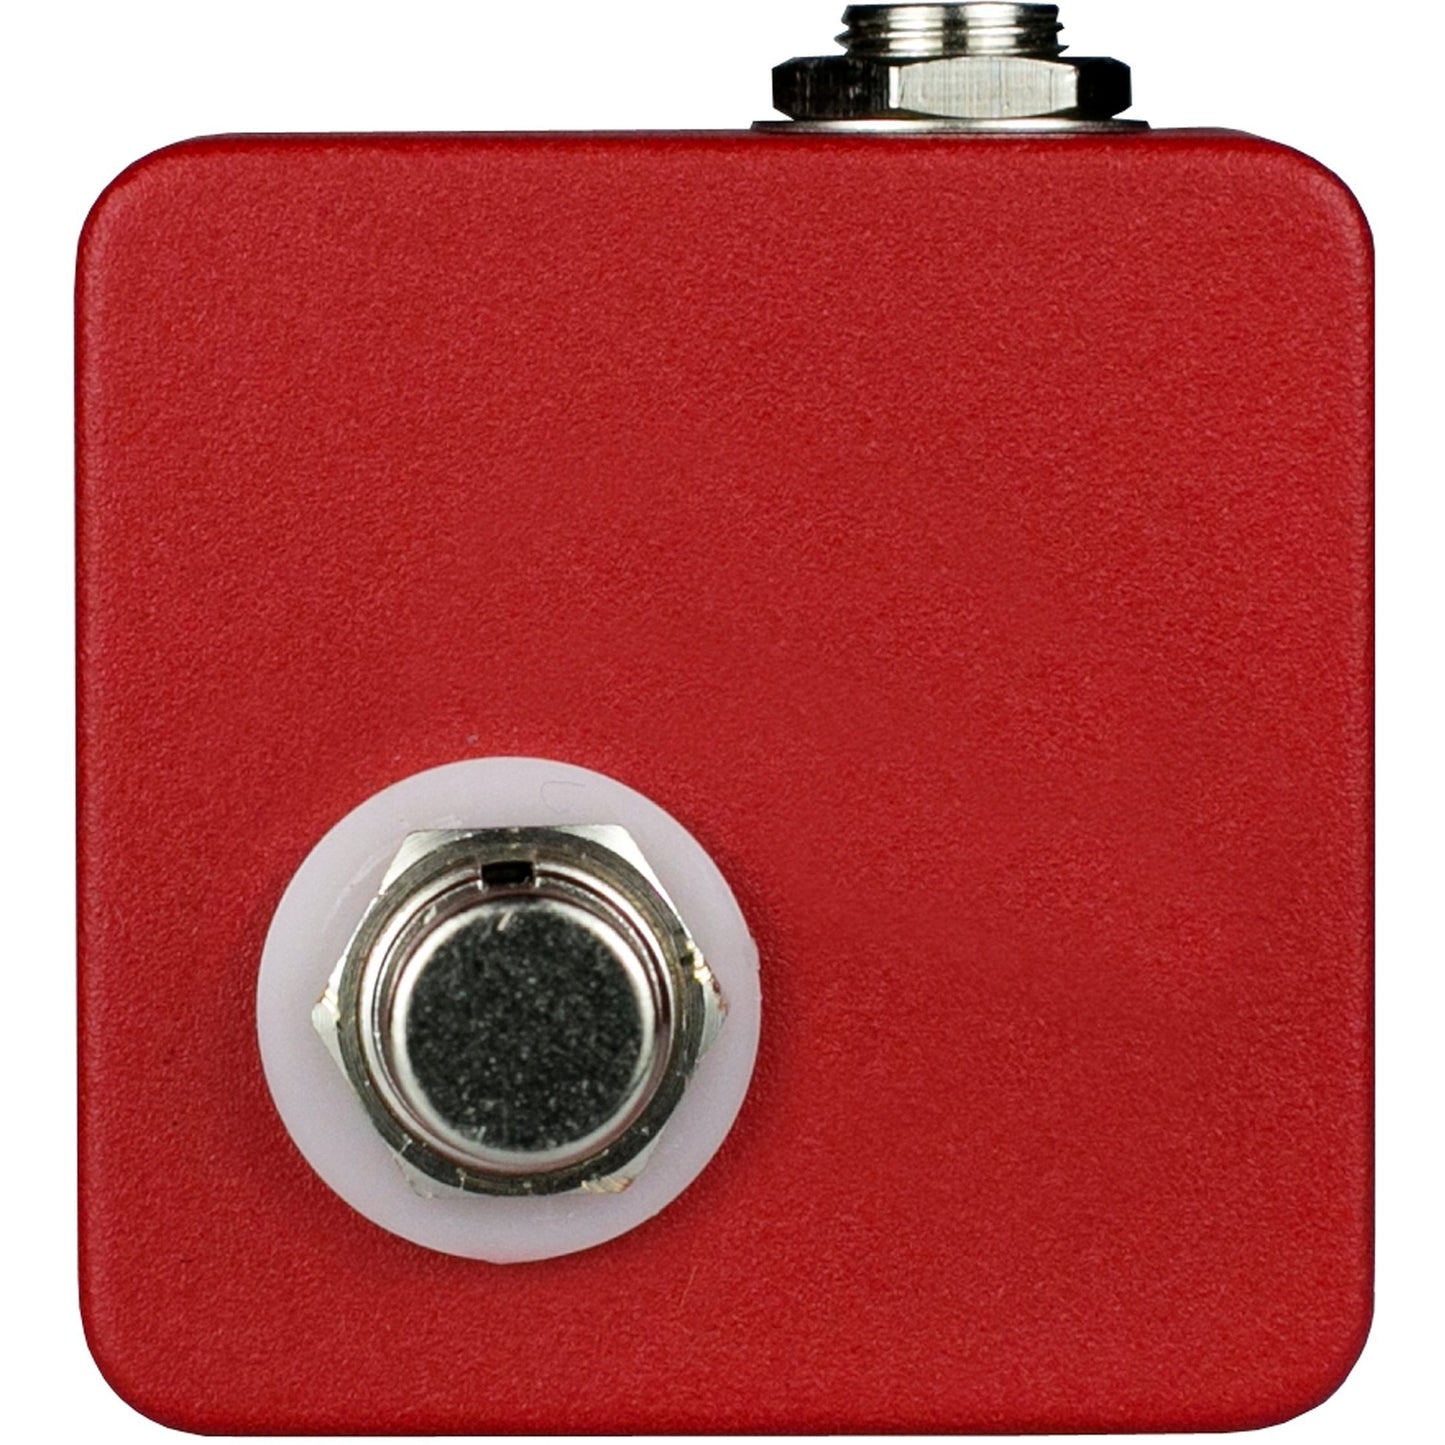 JHS Red Remote Footswitch Pedal